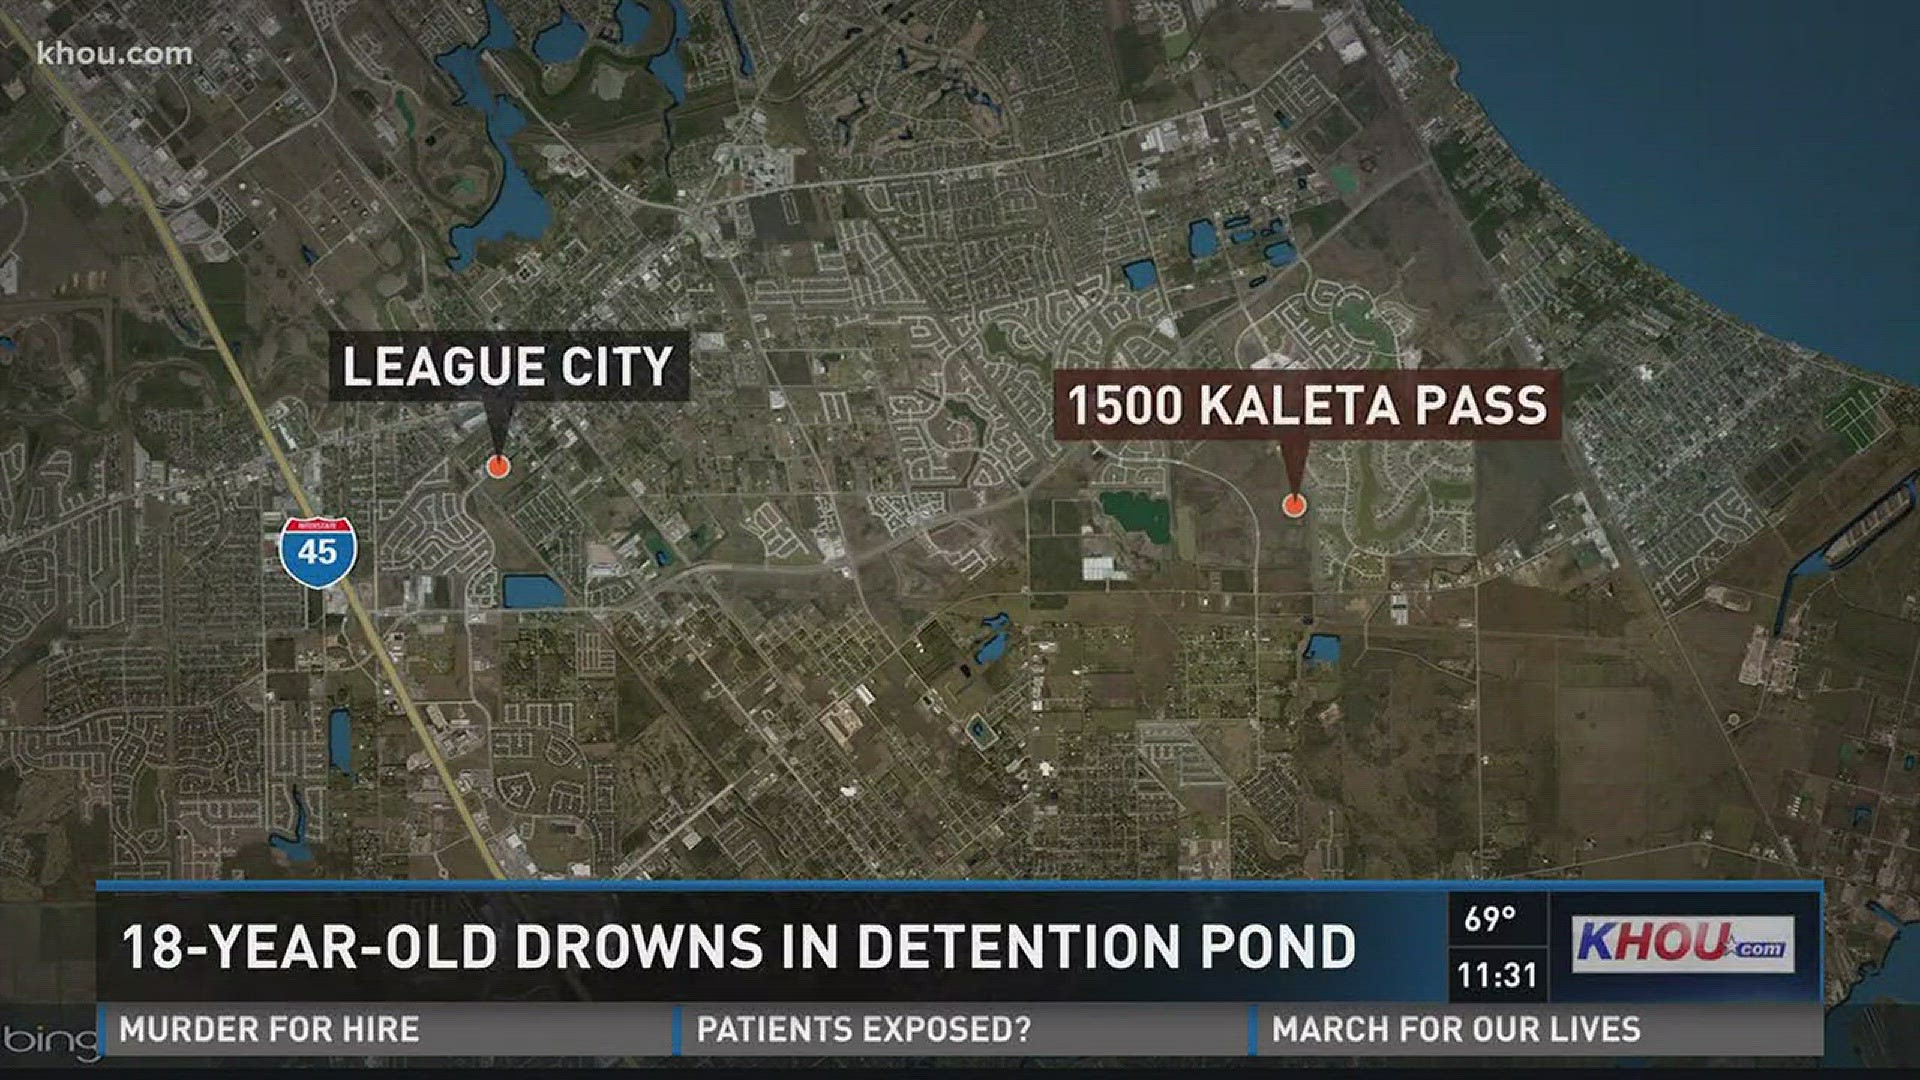 League City Police say a teenager drowned Friday night in a detention pond.